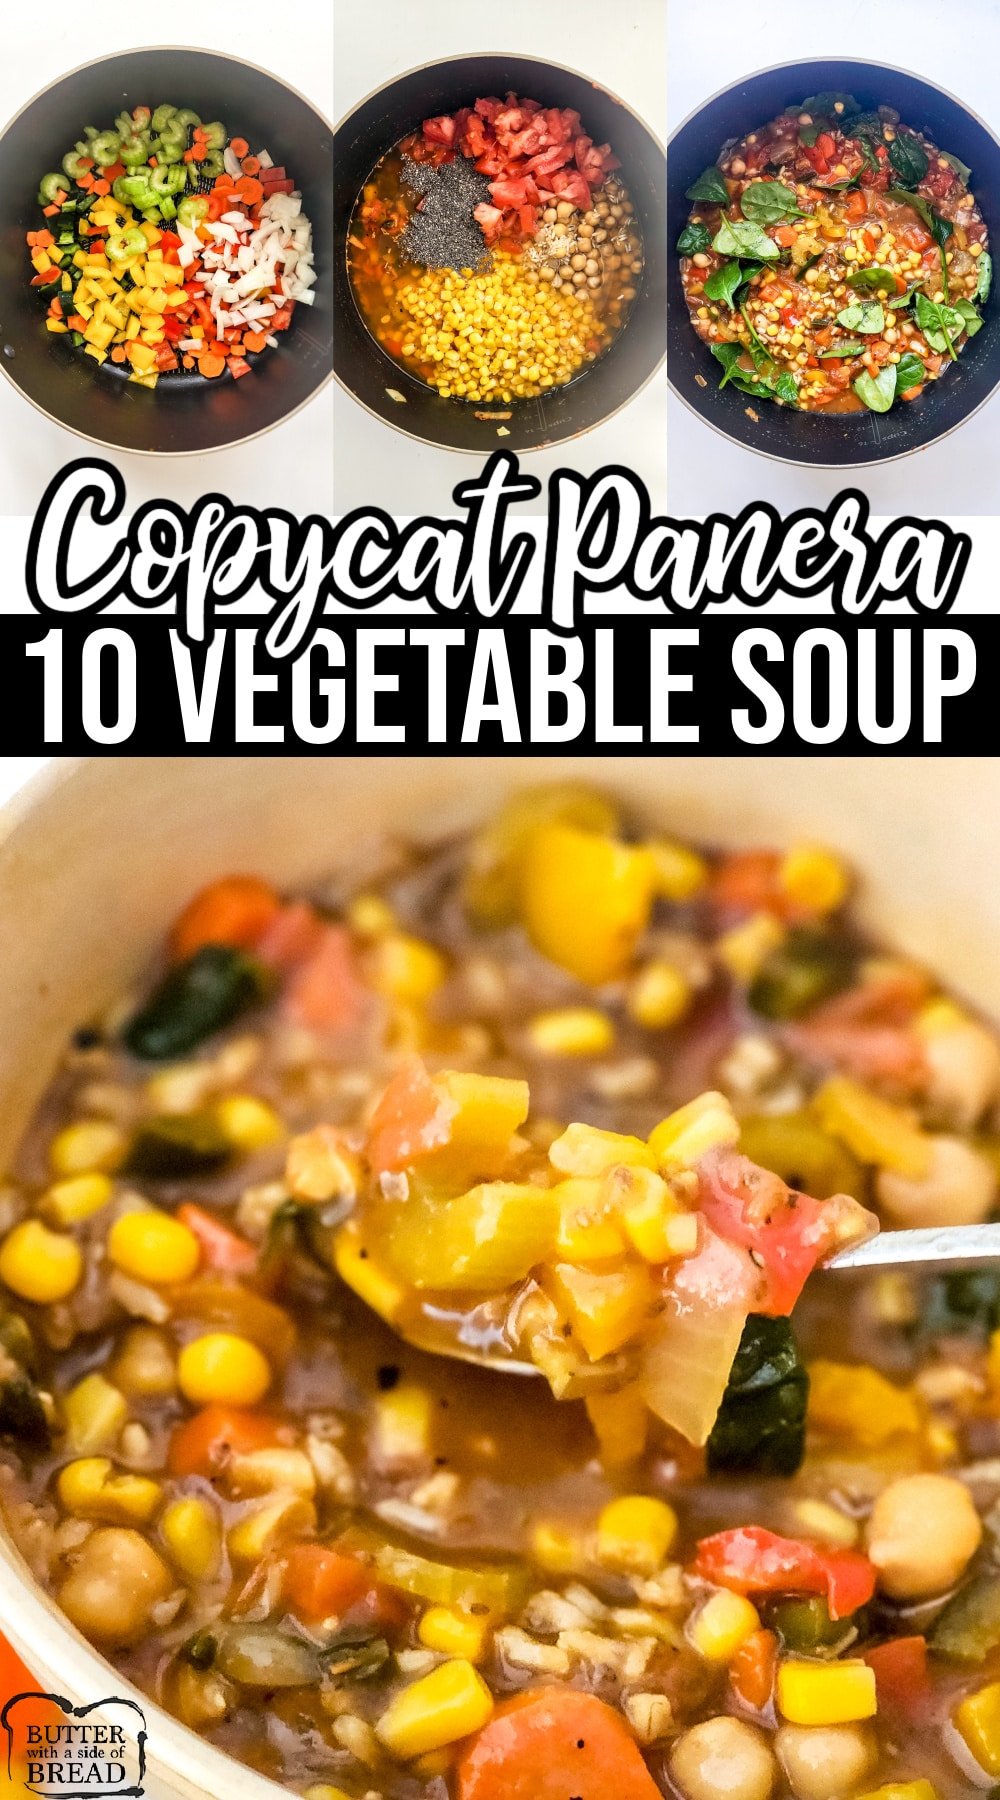 Copycat Panera 10 Vegetable Soup is literally packed with vegetables! A light and delicious vegetable broth based soup with tons of flavor.